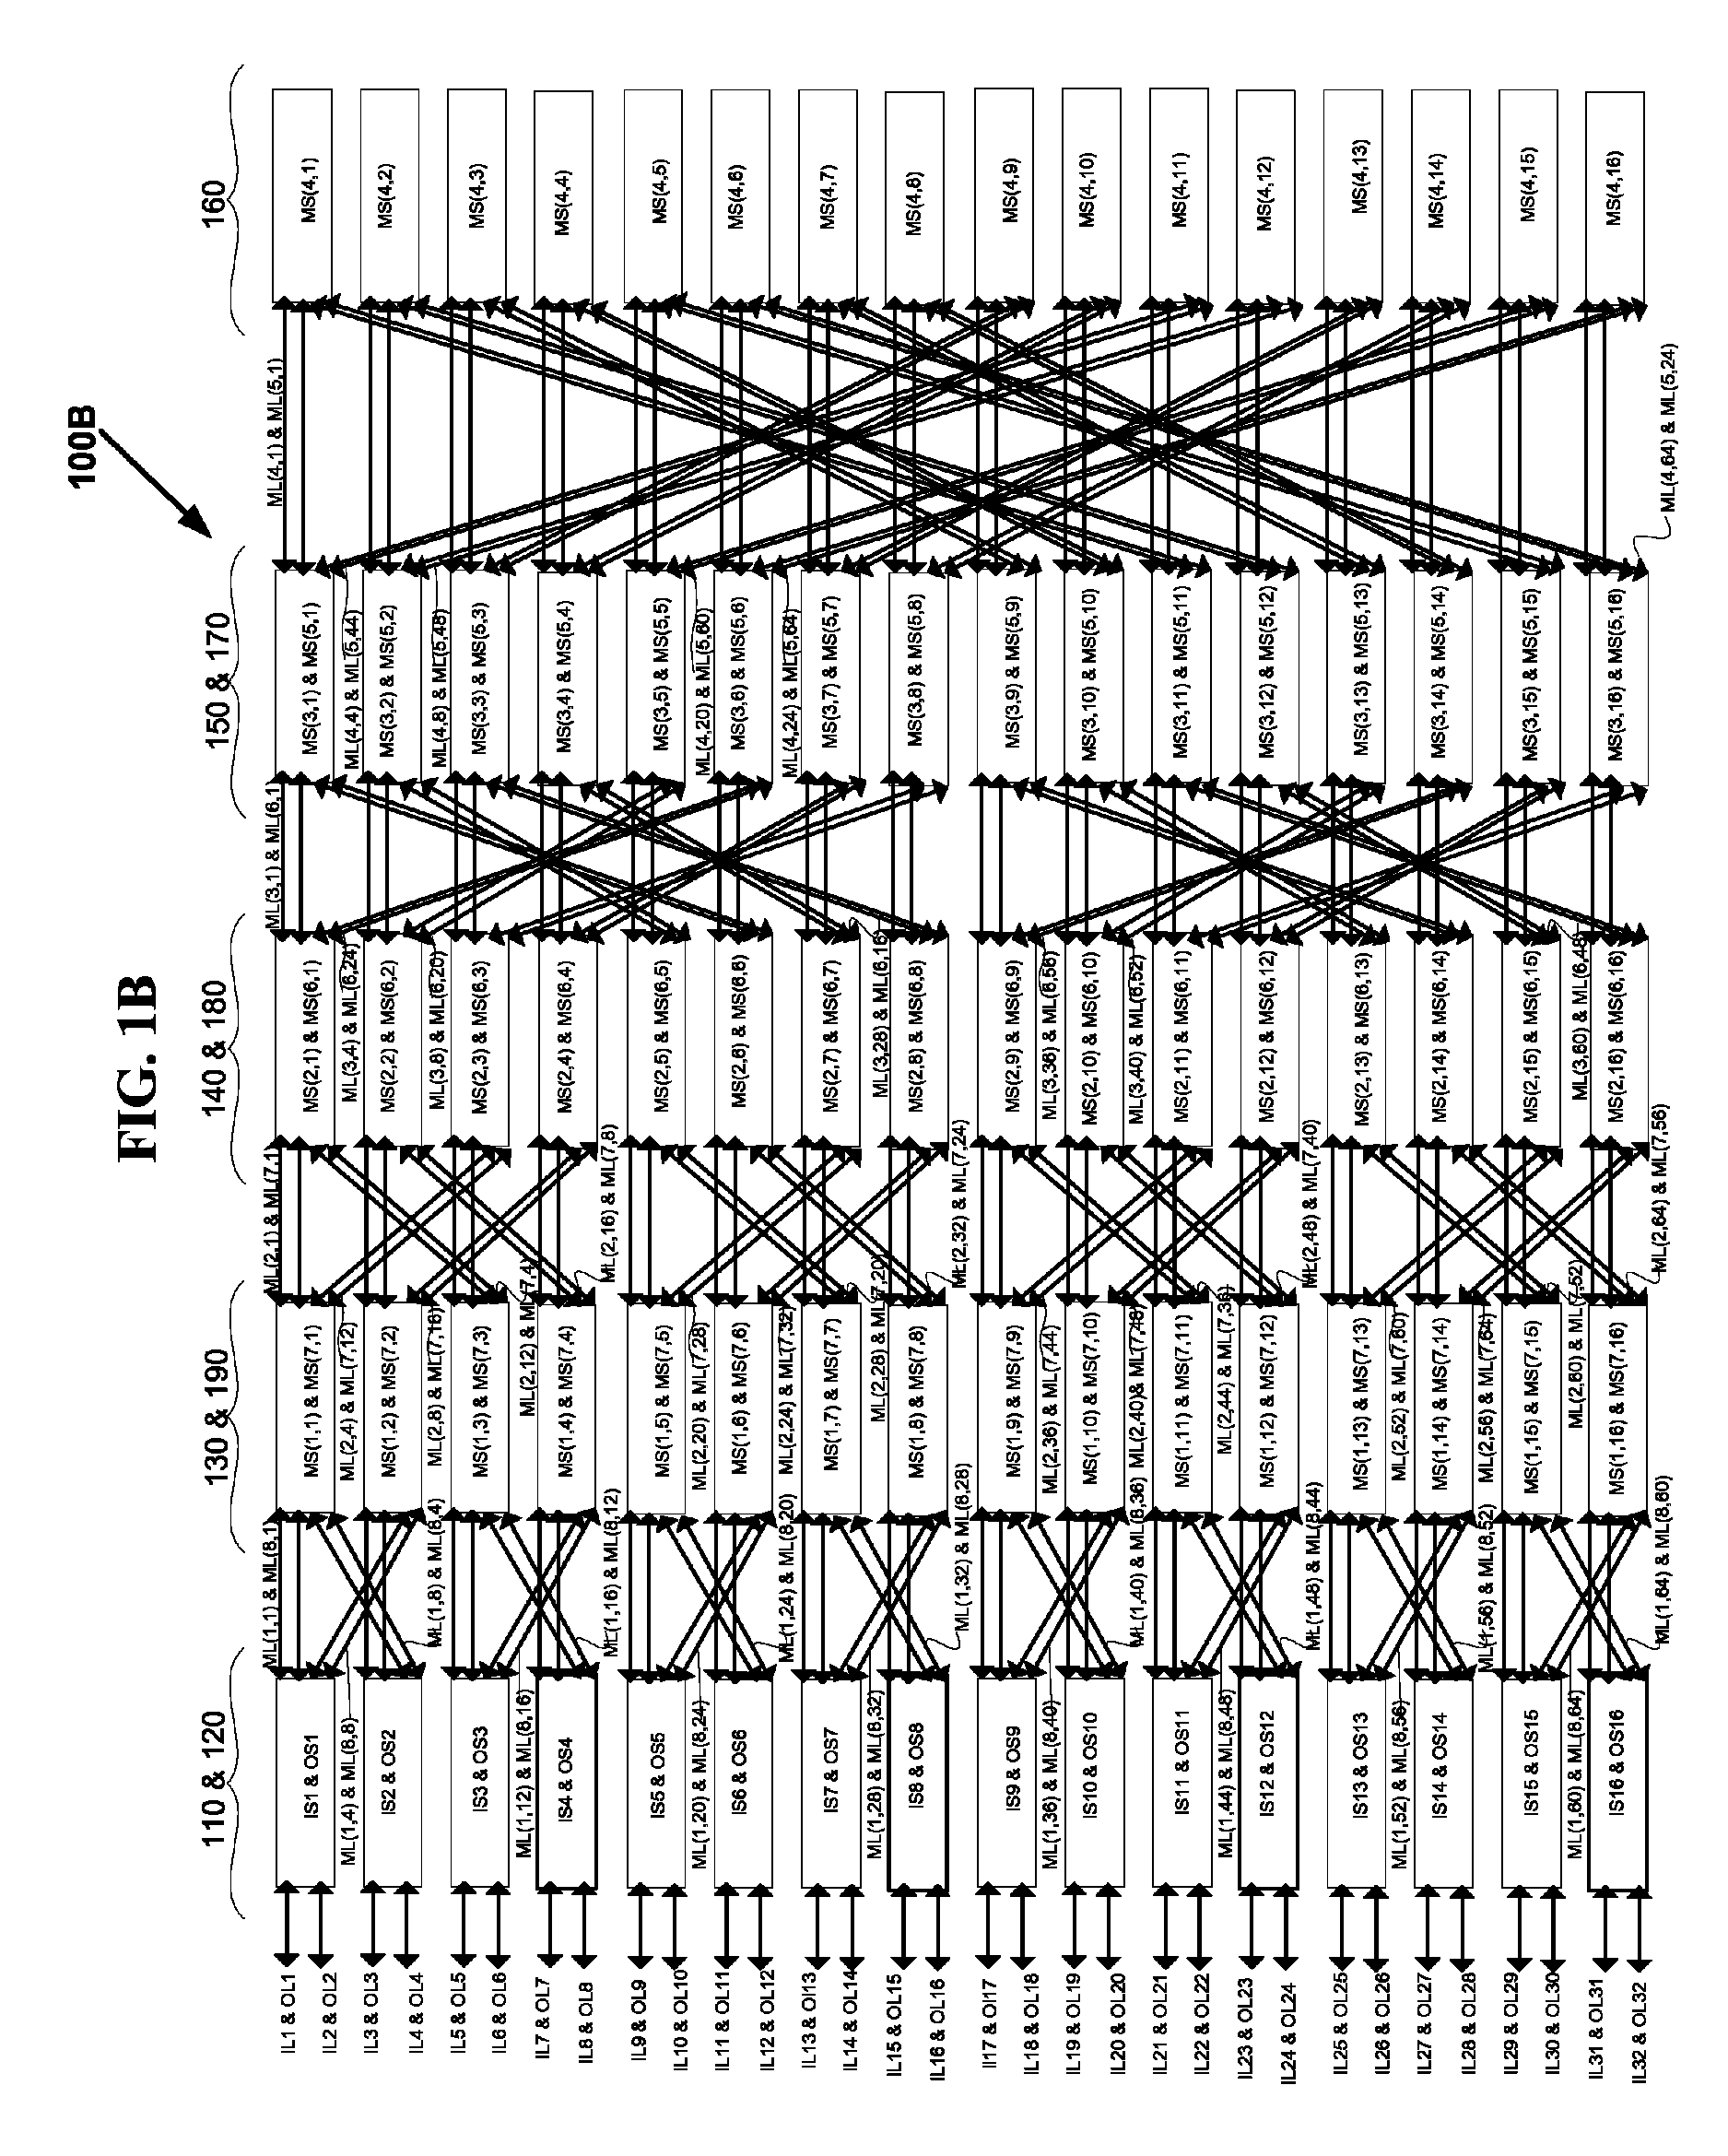 VLSI layouts of fully connected generalized and pyramid networks with locality exploitation